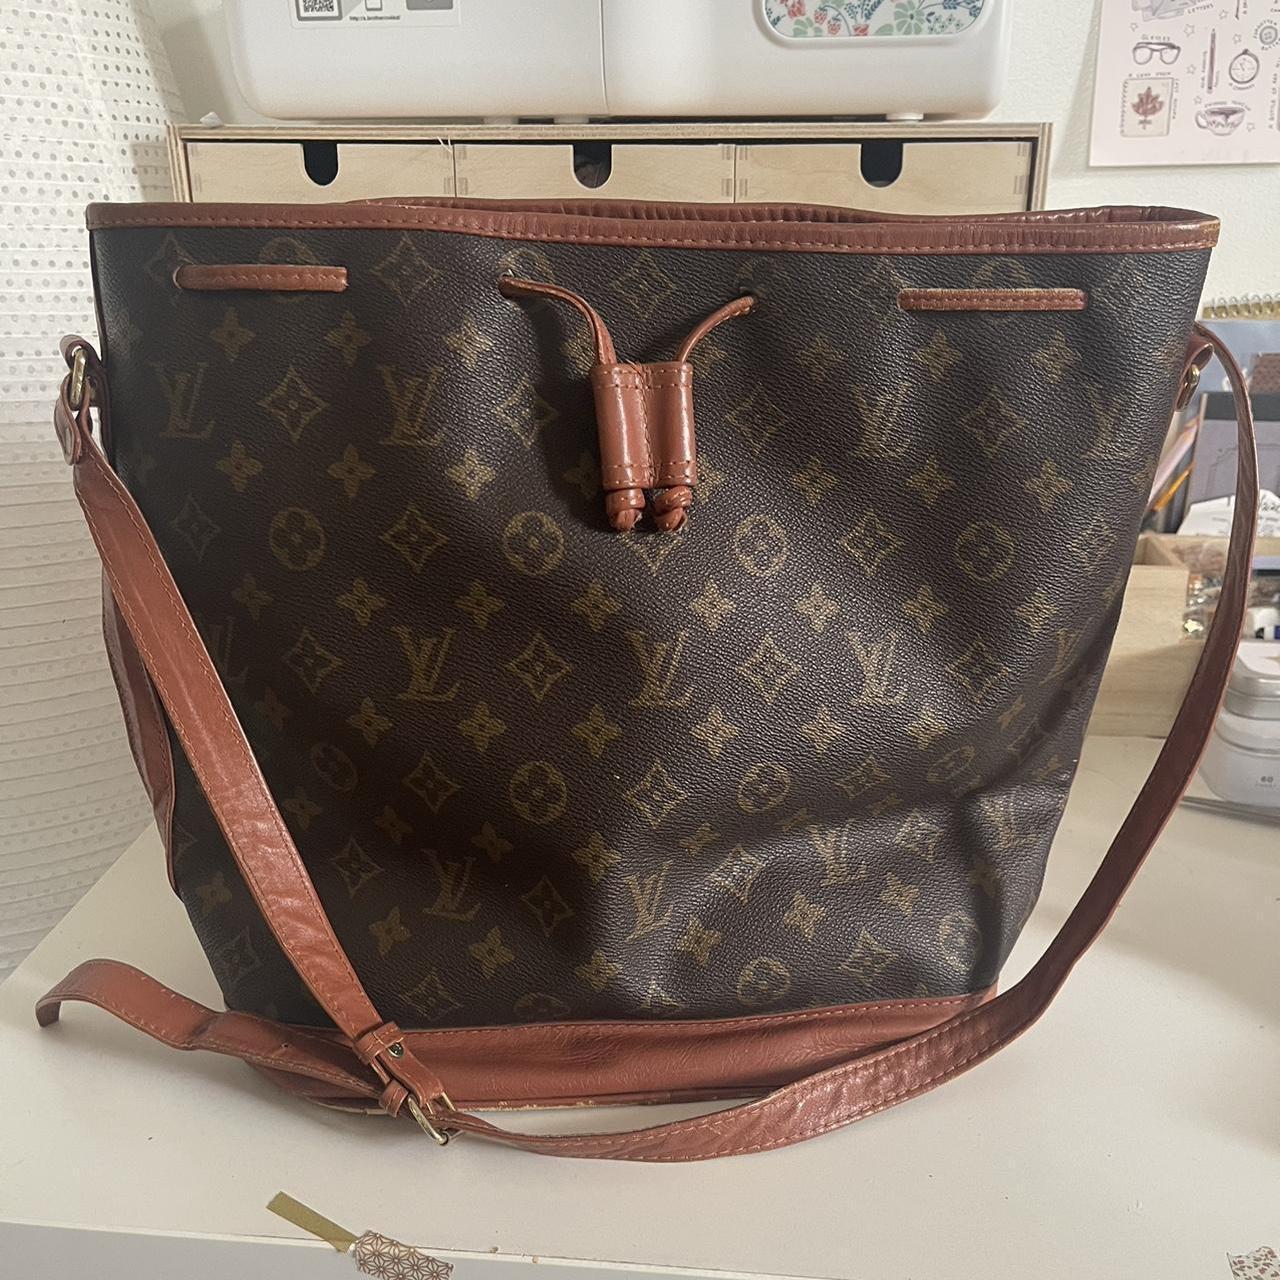 Used once, authentic genuine Louis Vuitton Jasmin - Depop